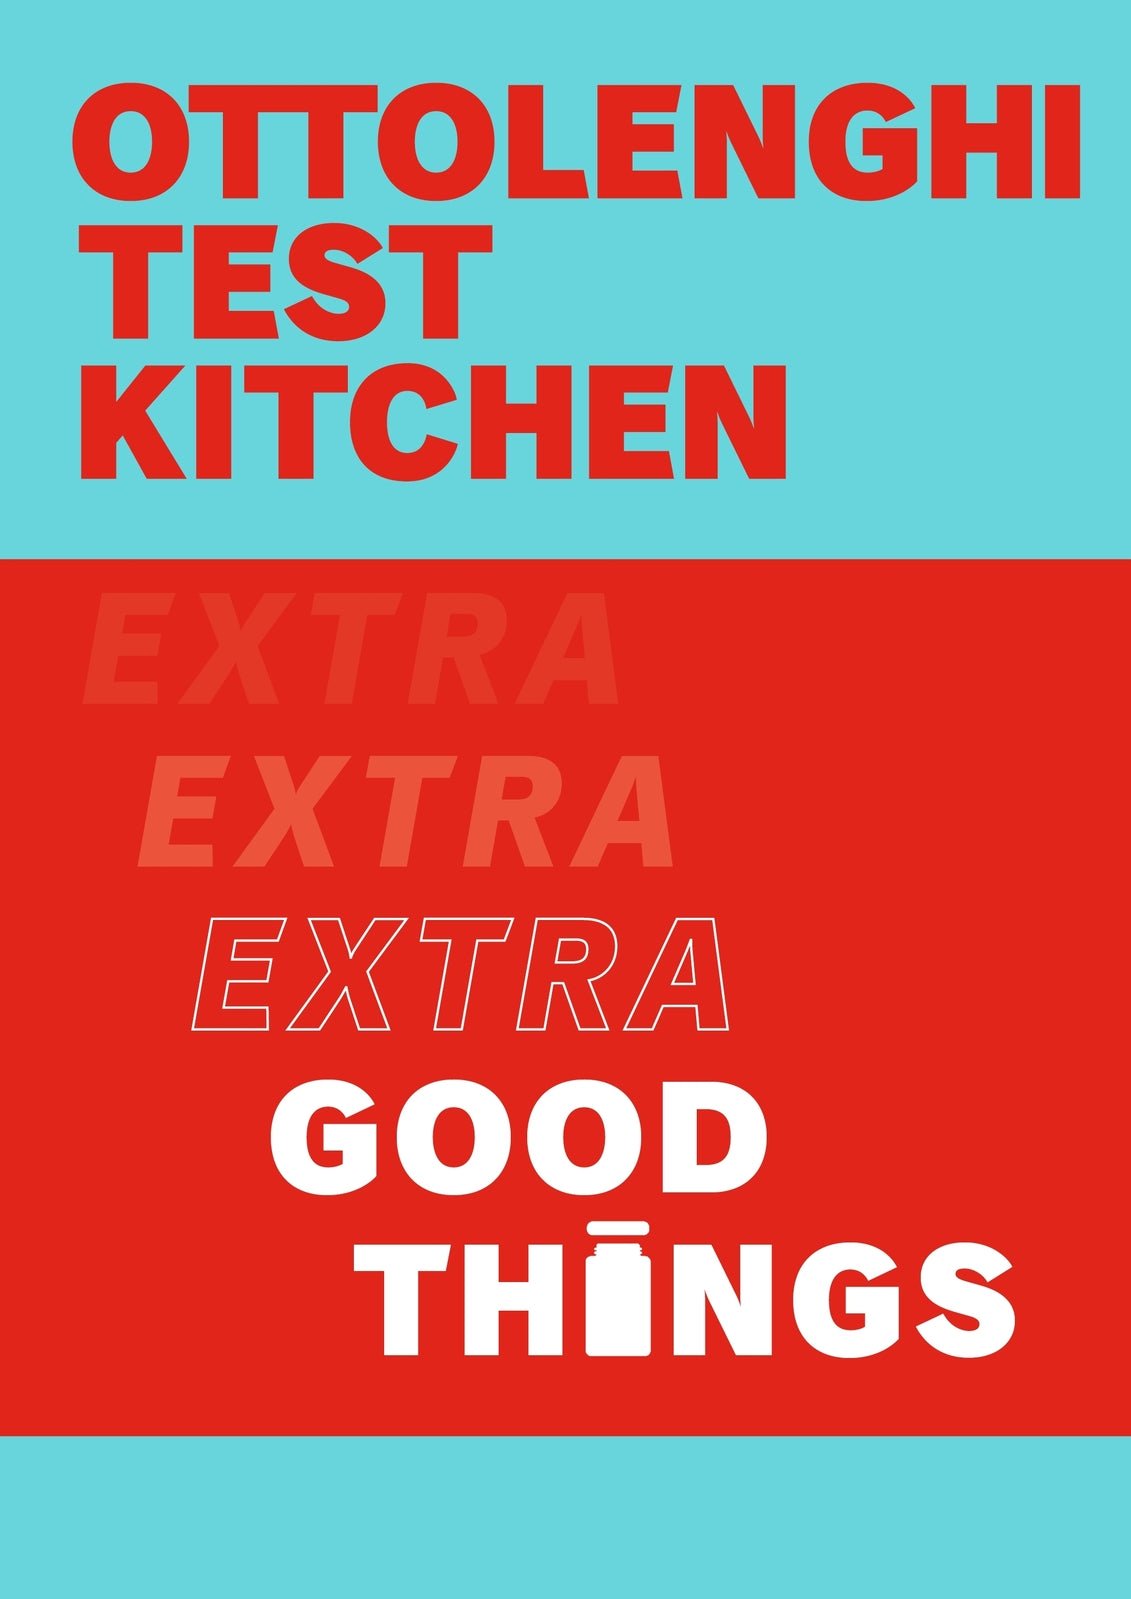 Ottolenghi Test Kitchen: Extra Good Things | Creeping Fig